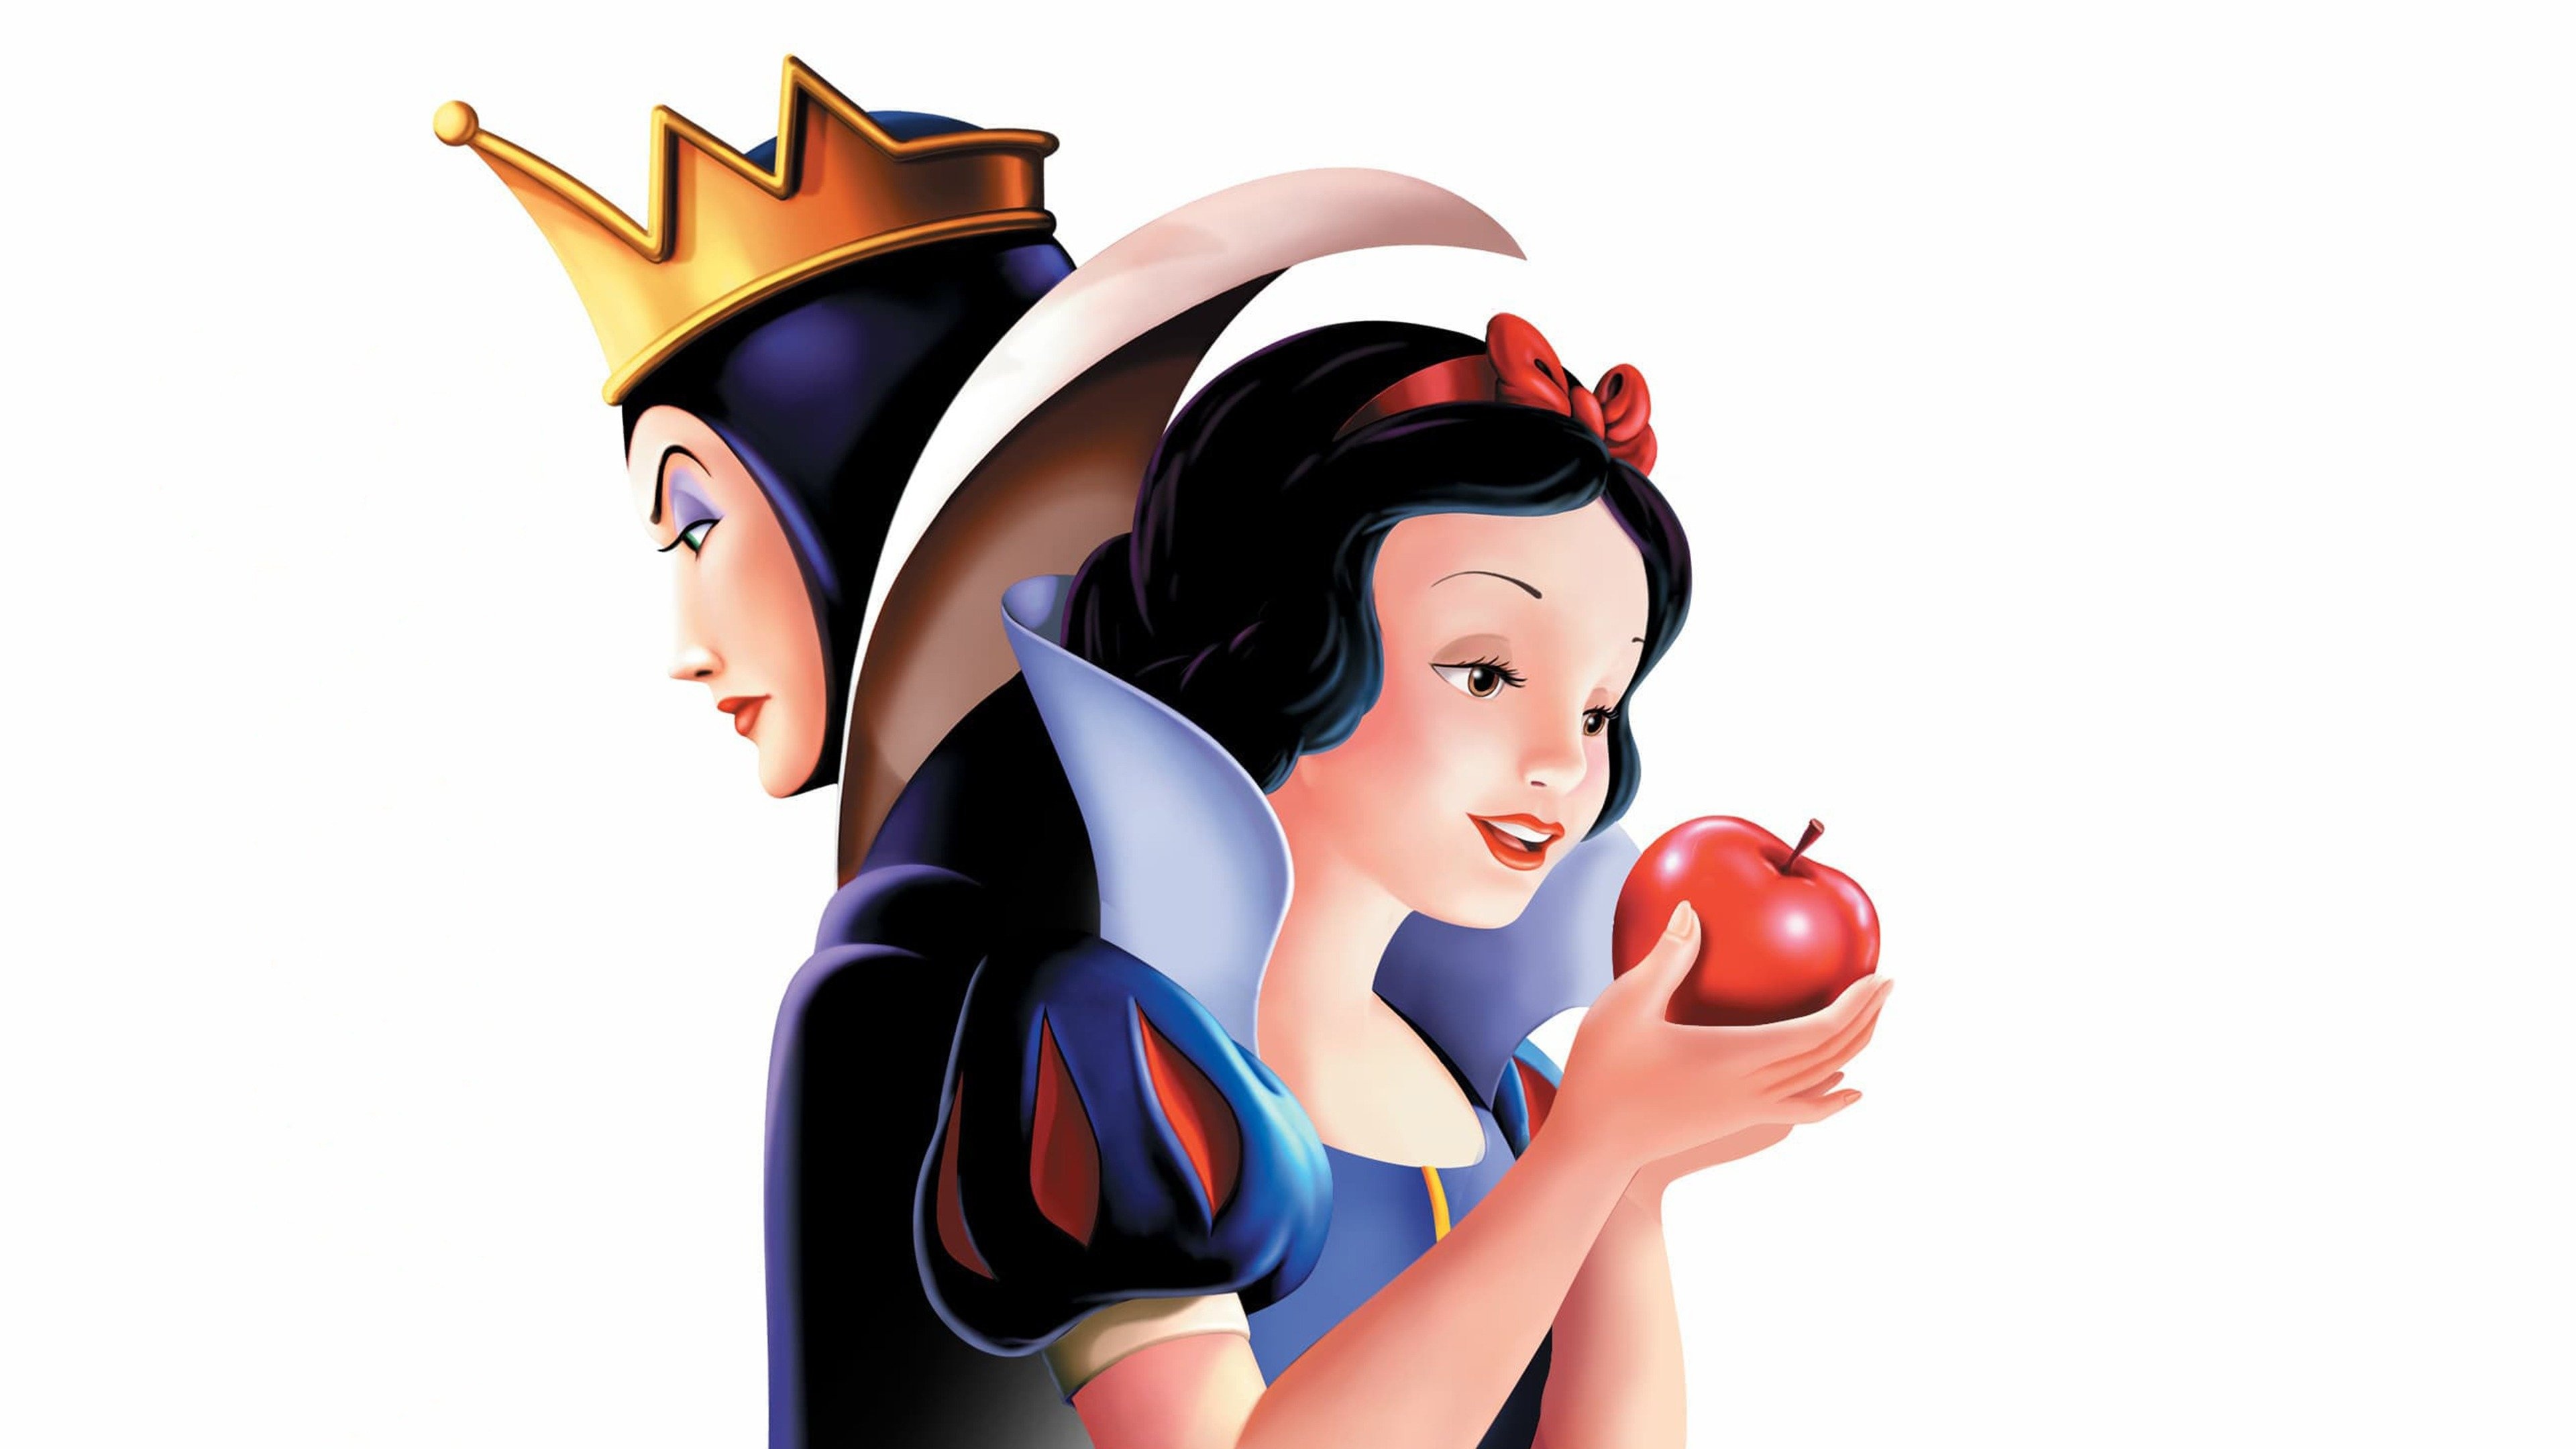 Snow White and the Seven Dwarfs, Timeless animated film, Full movie online, Cinematic experience, 3840x2160 4K Desktop